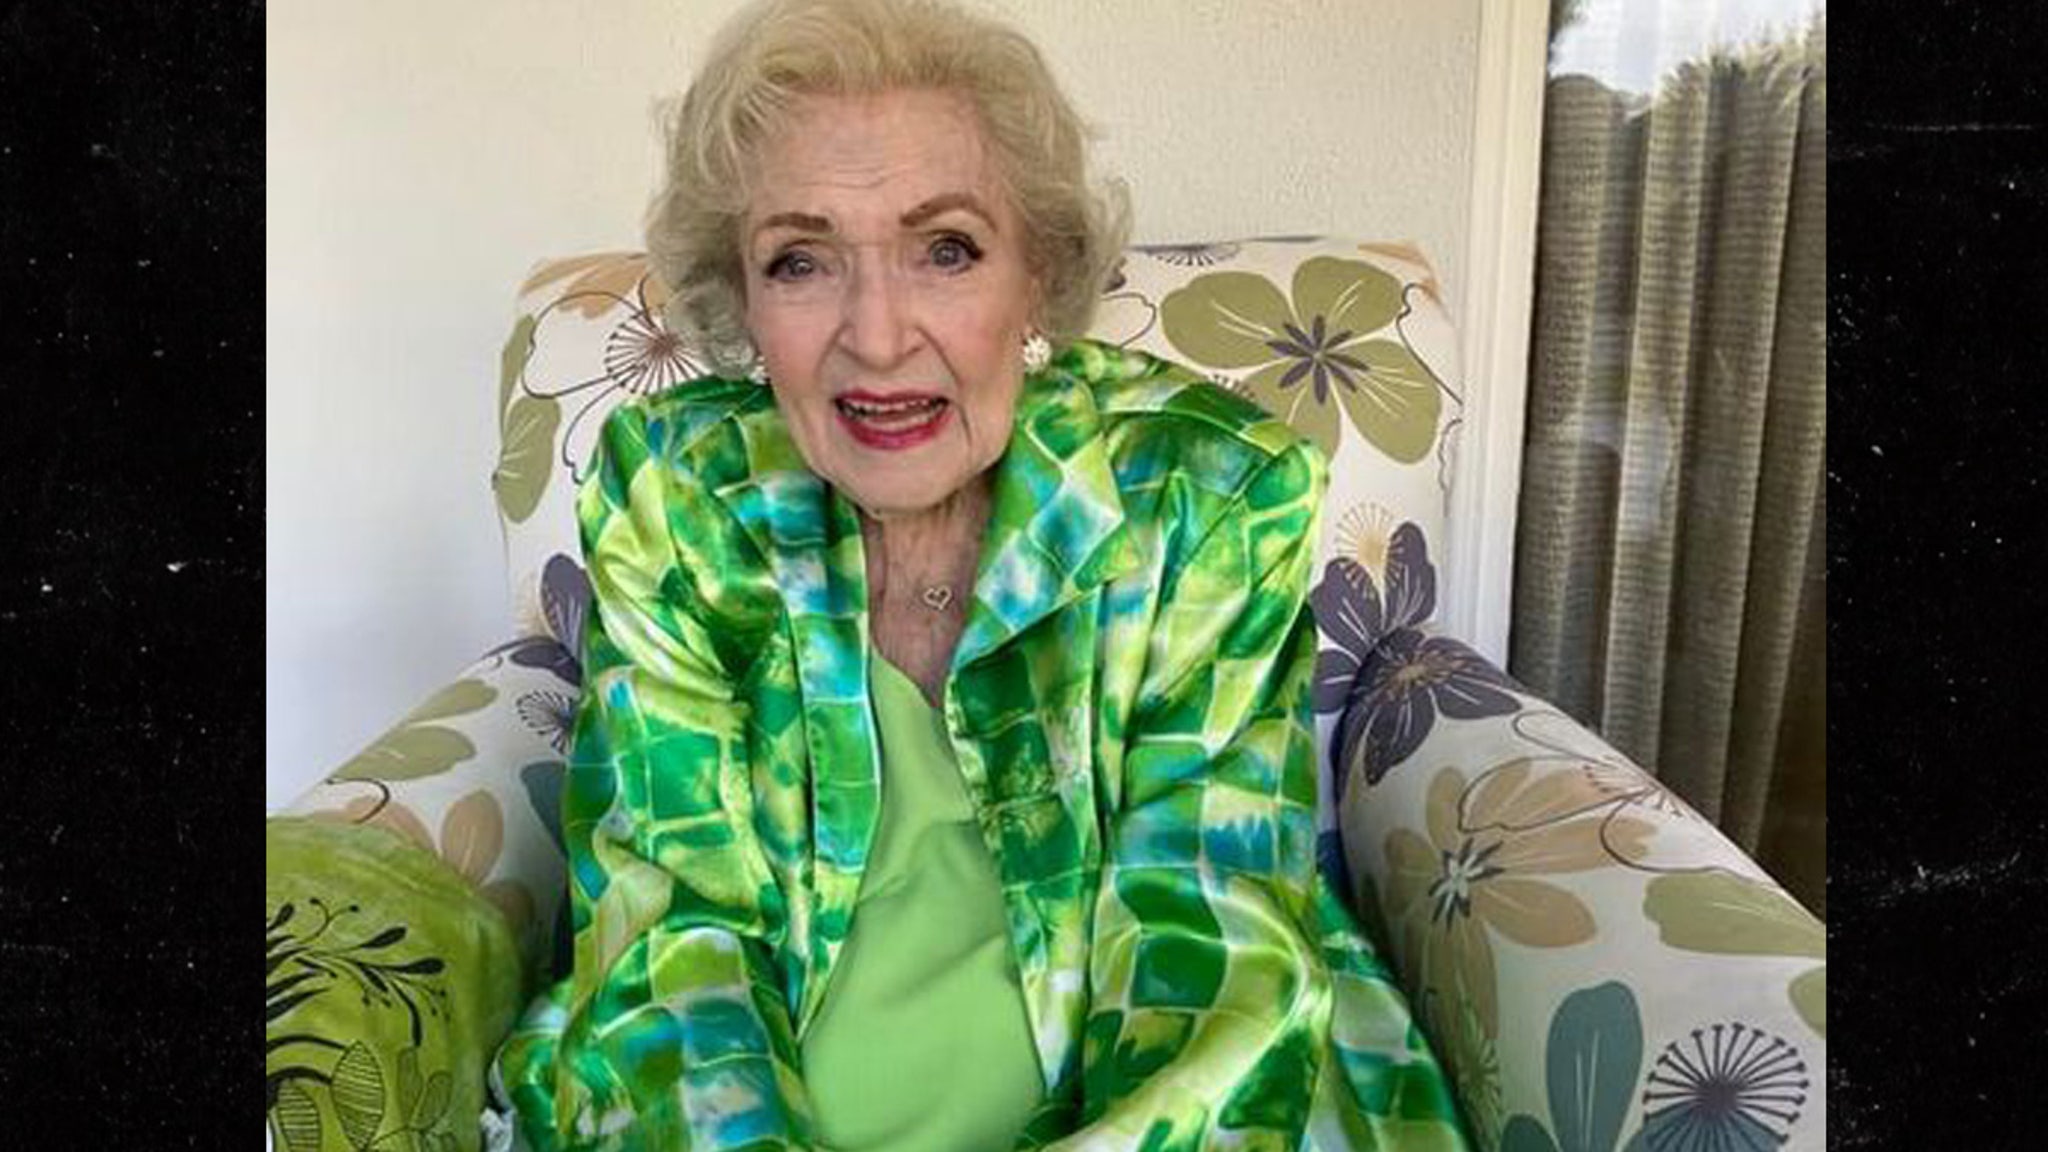 Betty White’s Assistant Posts One of the Last Photographs of Her Before Death